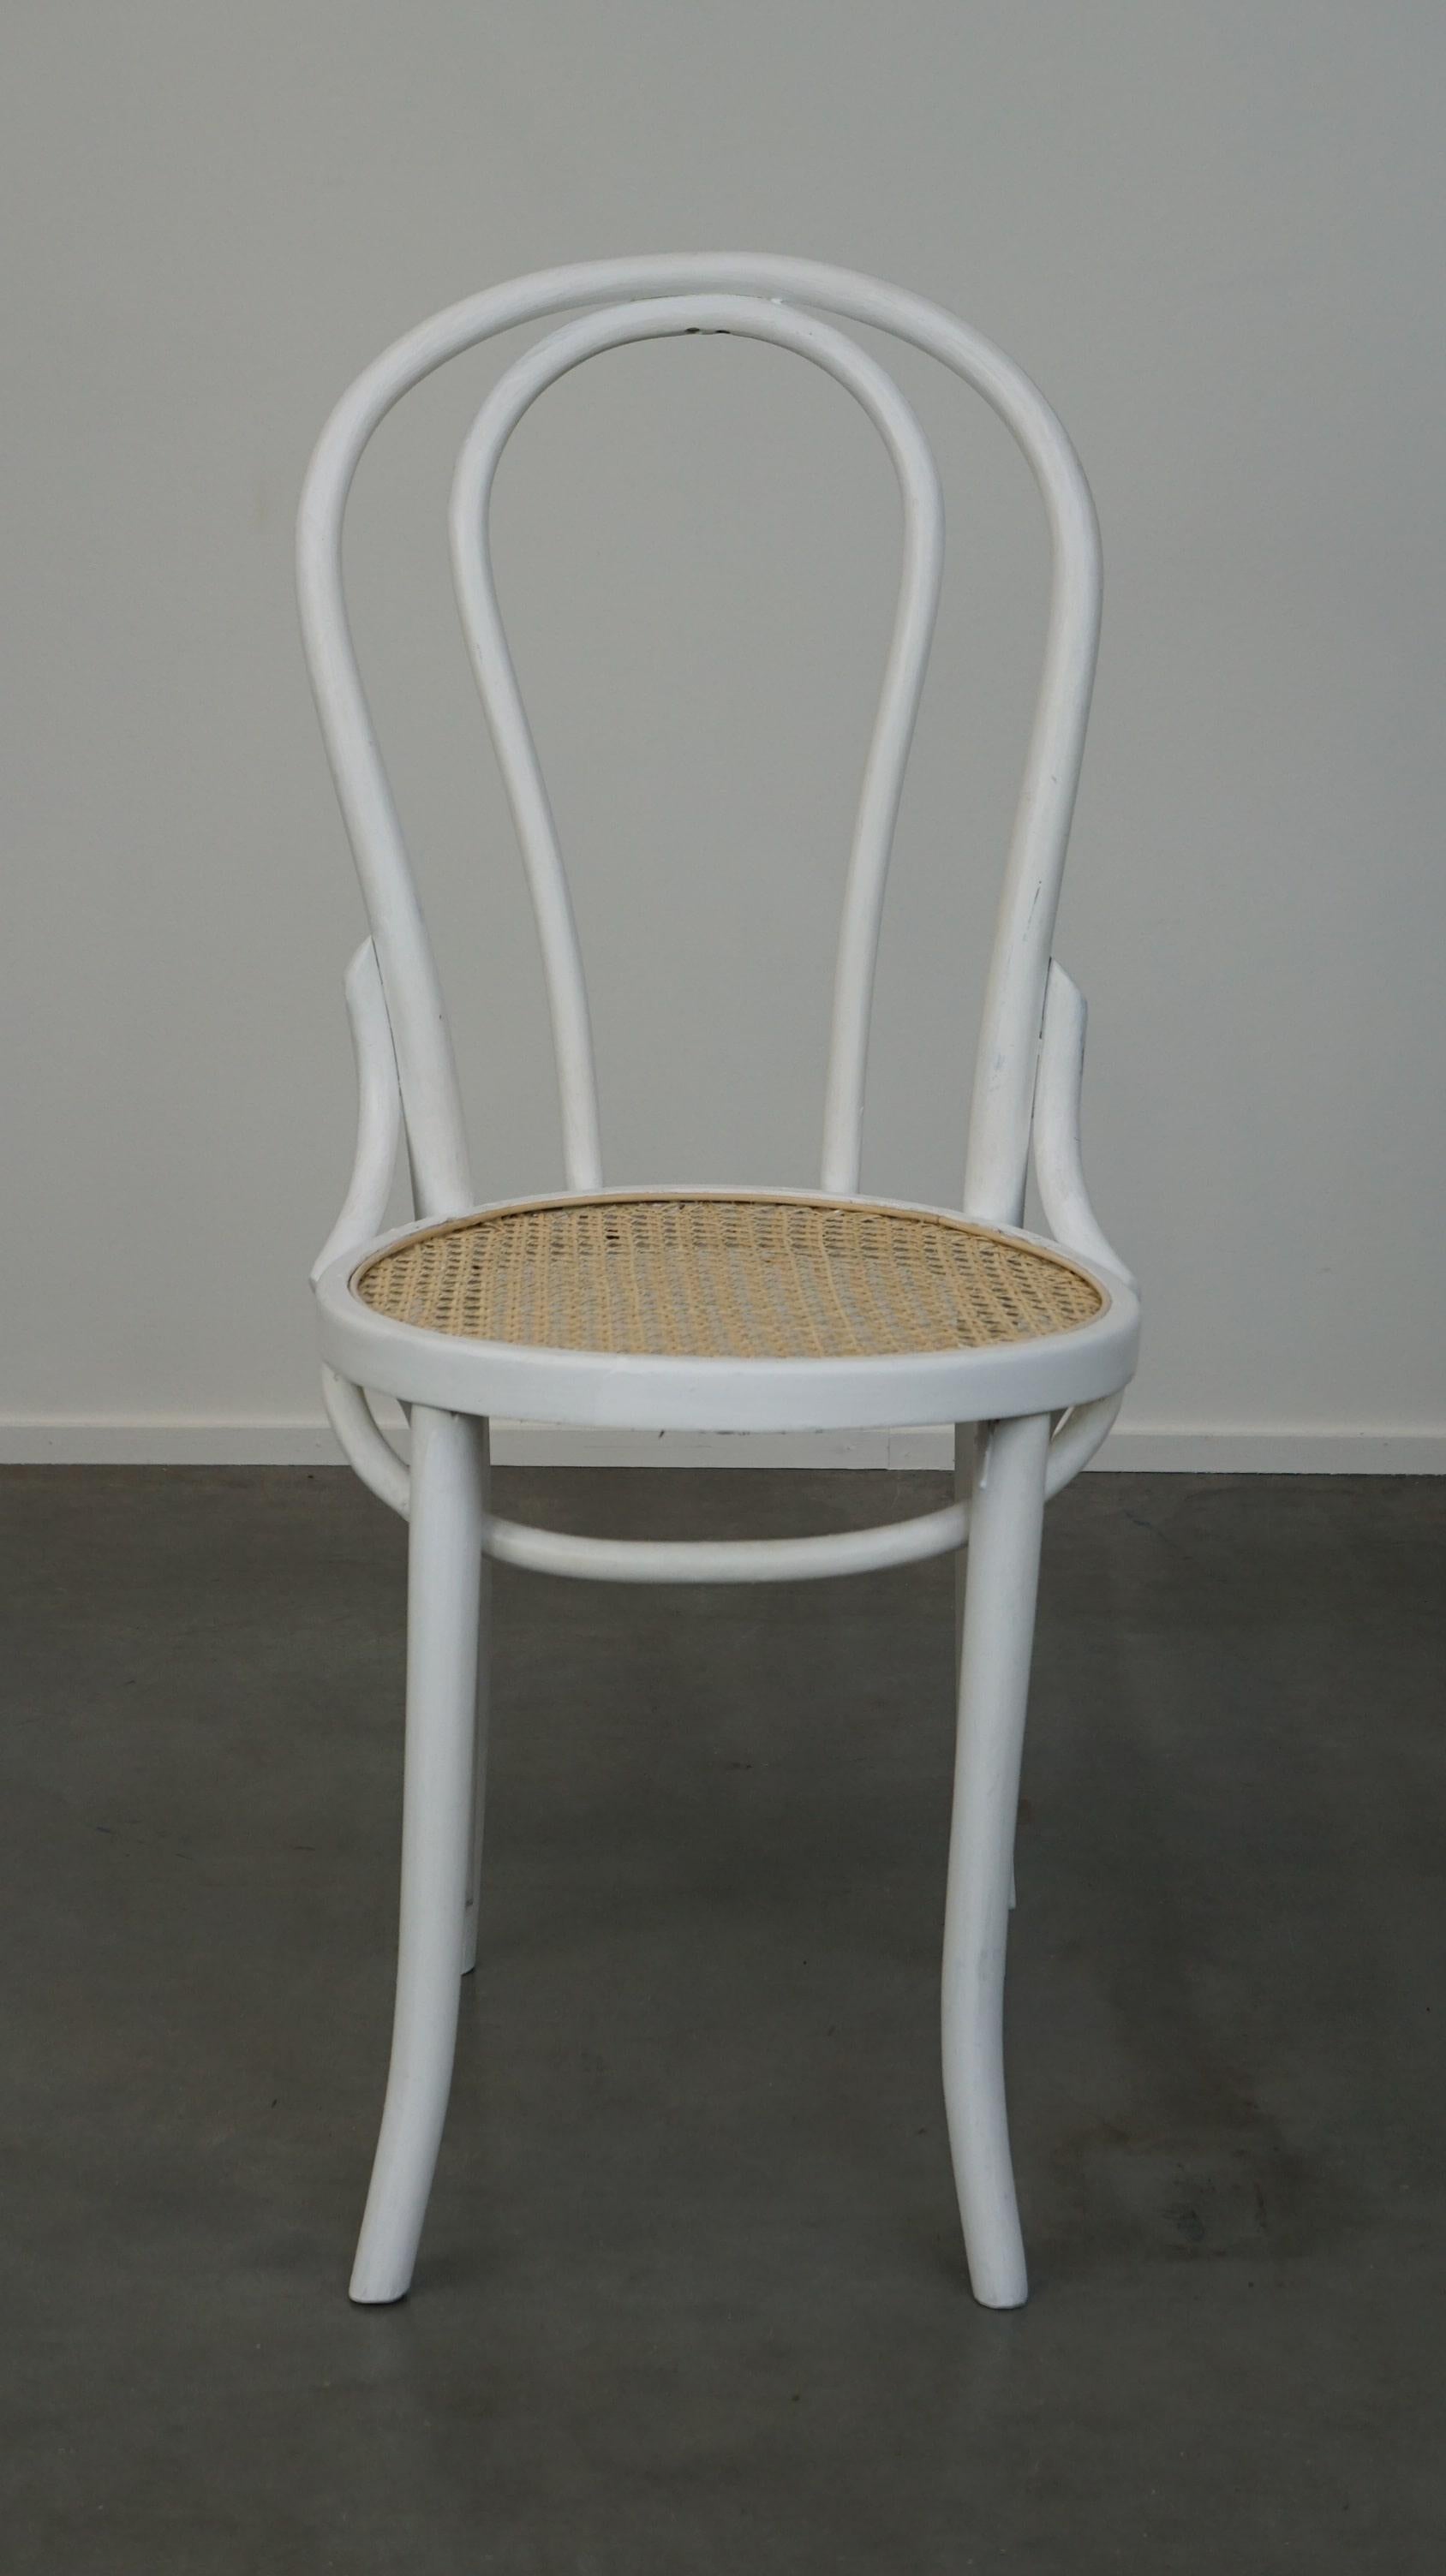 Chair no. 18 is one of the most famous chairs by Thonet. This chair was produced by the Austrian designer Josef Hoffmann, probably around 1900. This chair is painted over in white and has a new hand-woven seat. It is still in good condition and has